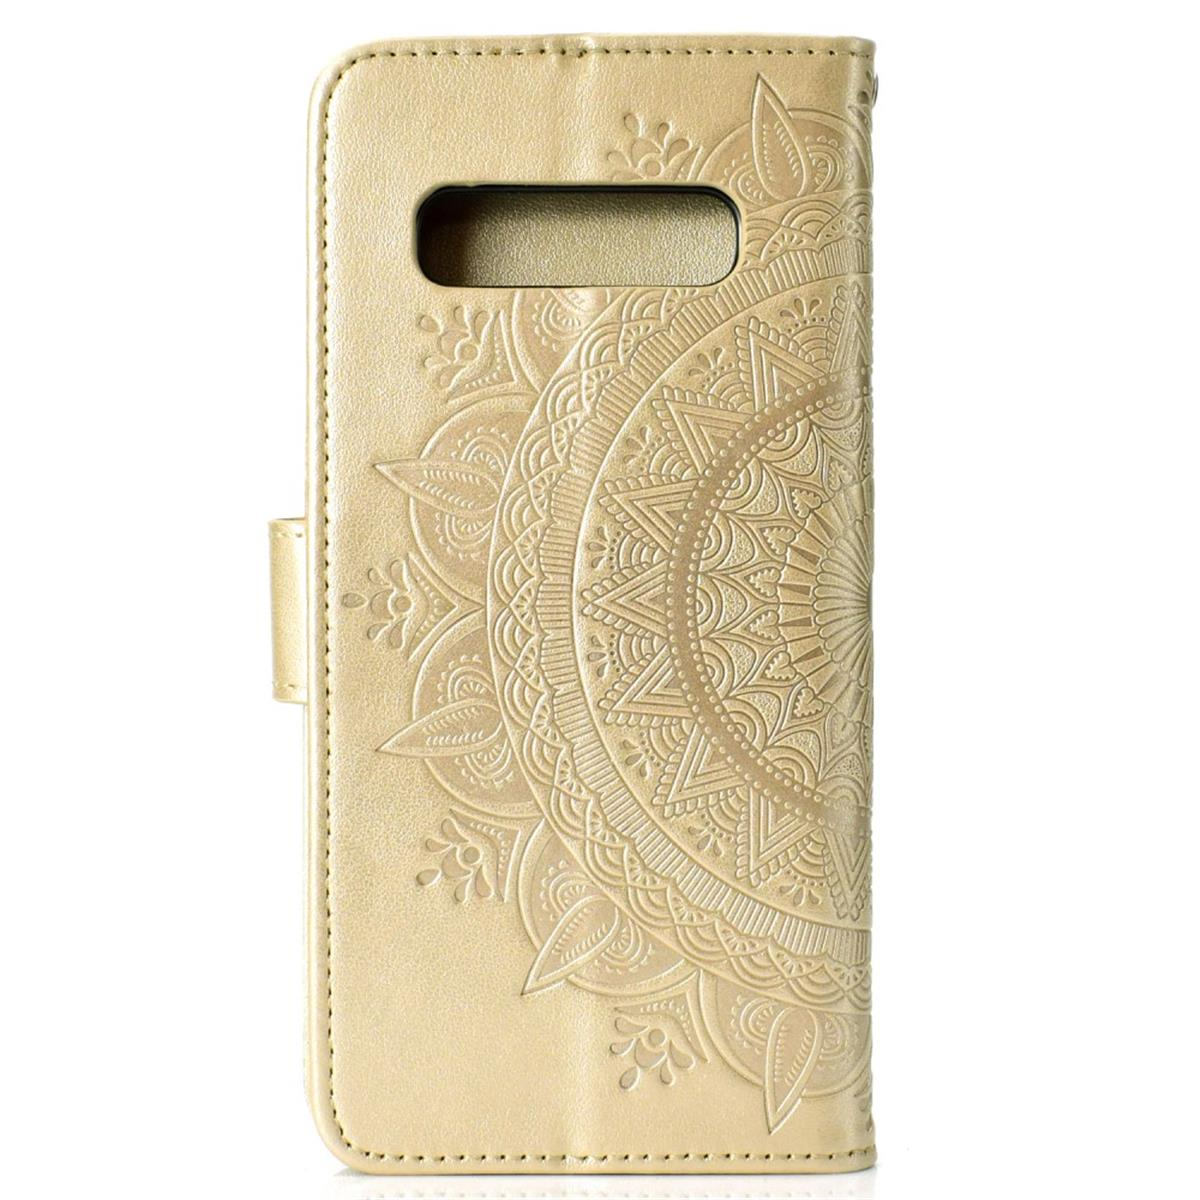 COVERKINGZ Klapphülle mit Mandala [Plus], Muster, Galaxy S10+ Samsung, Gold Bookcover